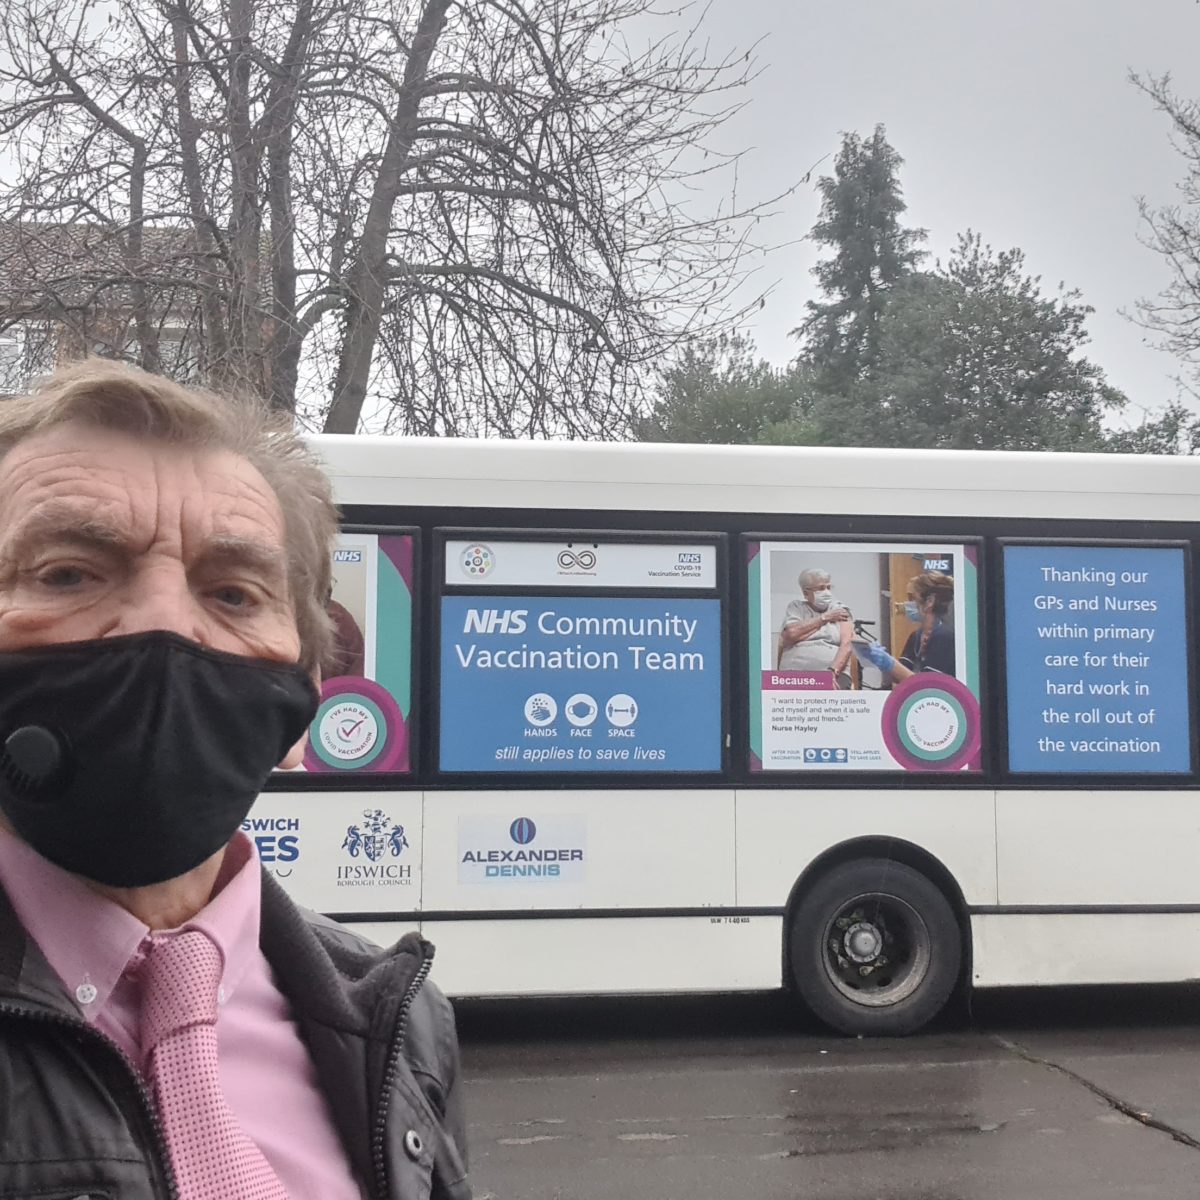 Vaccine bus comes at request of Cllr Dave Harris